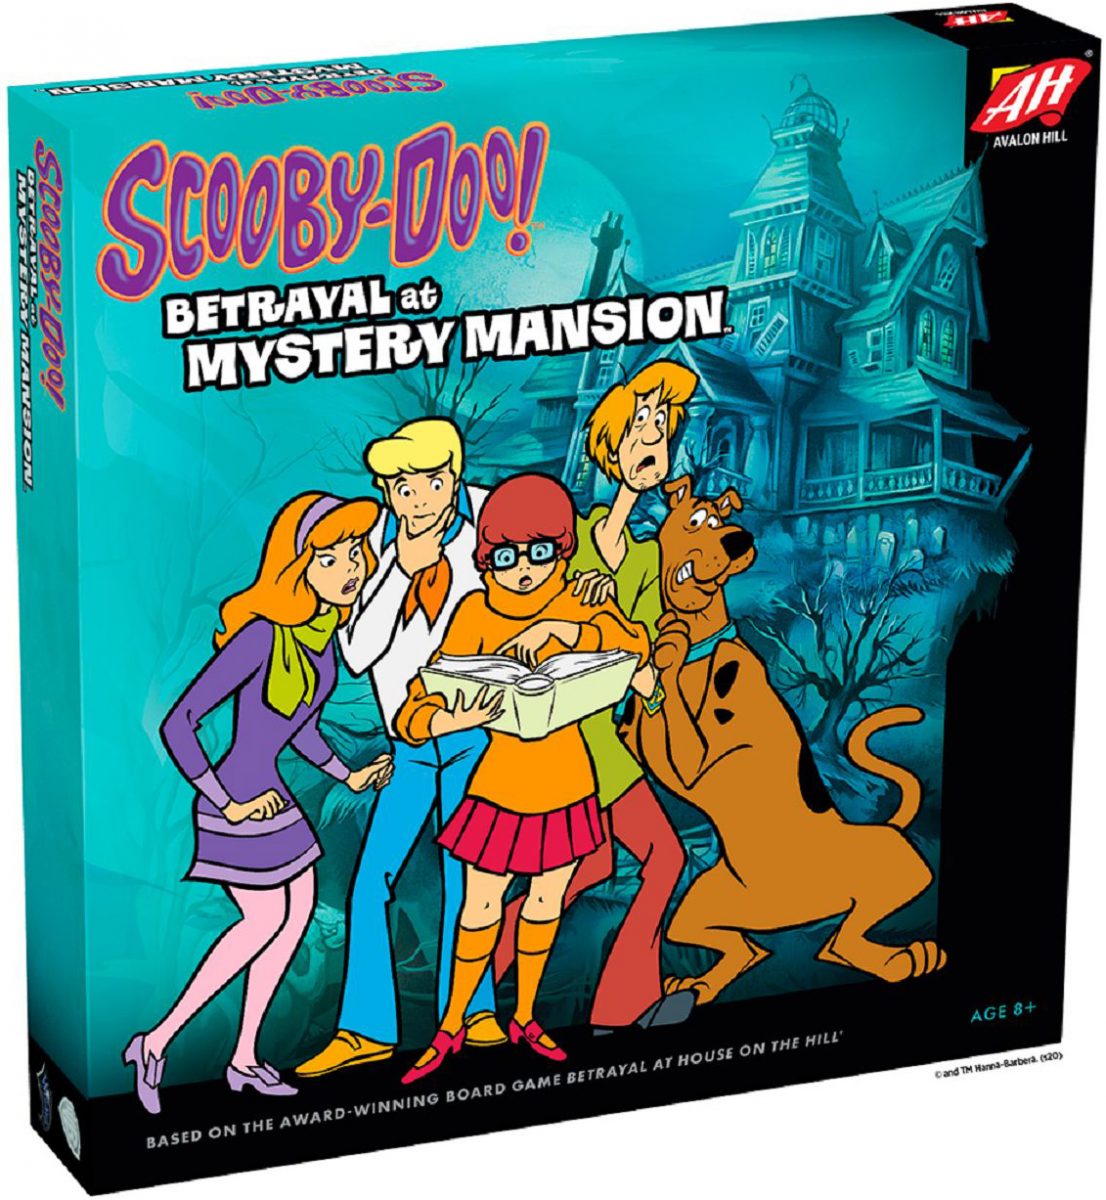 New Scooby  Doo  Betrayal at Mystery Mansion Board Game  Is 